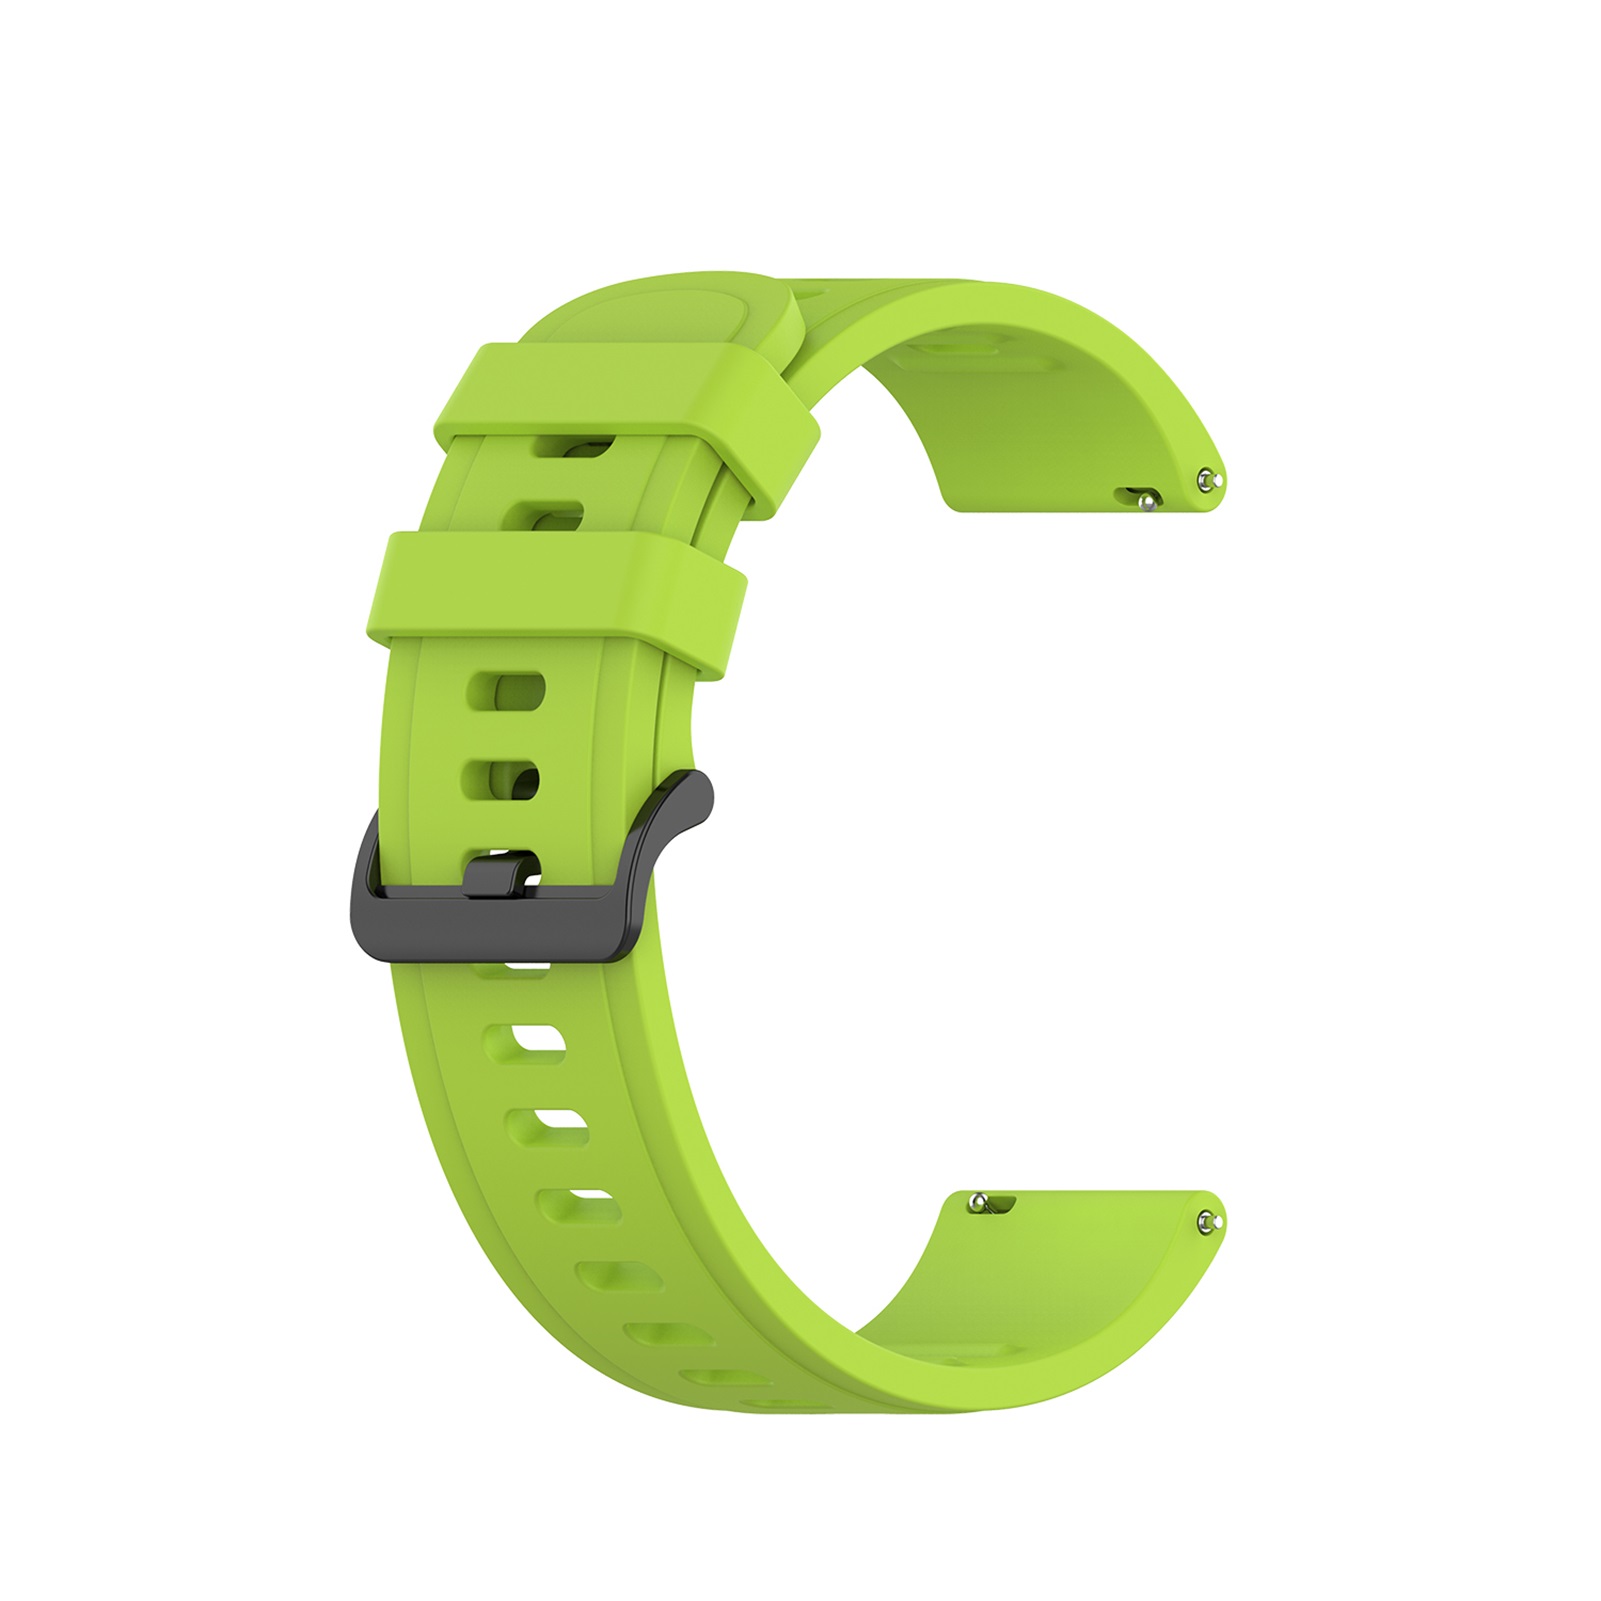 Bakeey-20mm-Multi-color-Silicone-Smart-Watch-Band-Replacement-Strap-For-Zeblaze-GTR--Haylou-LS02-1785338-22